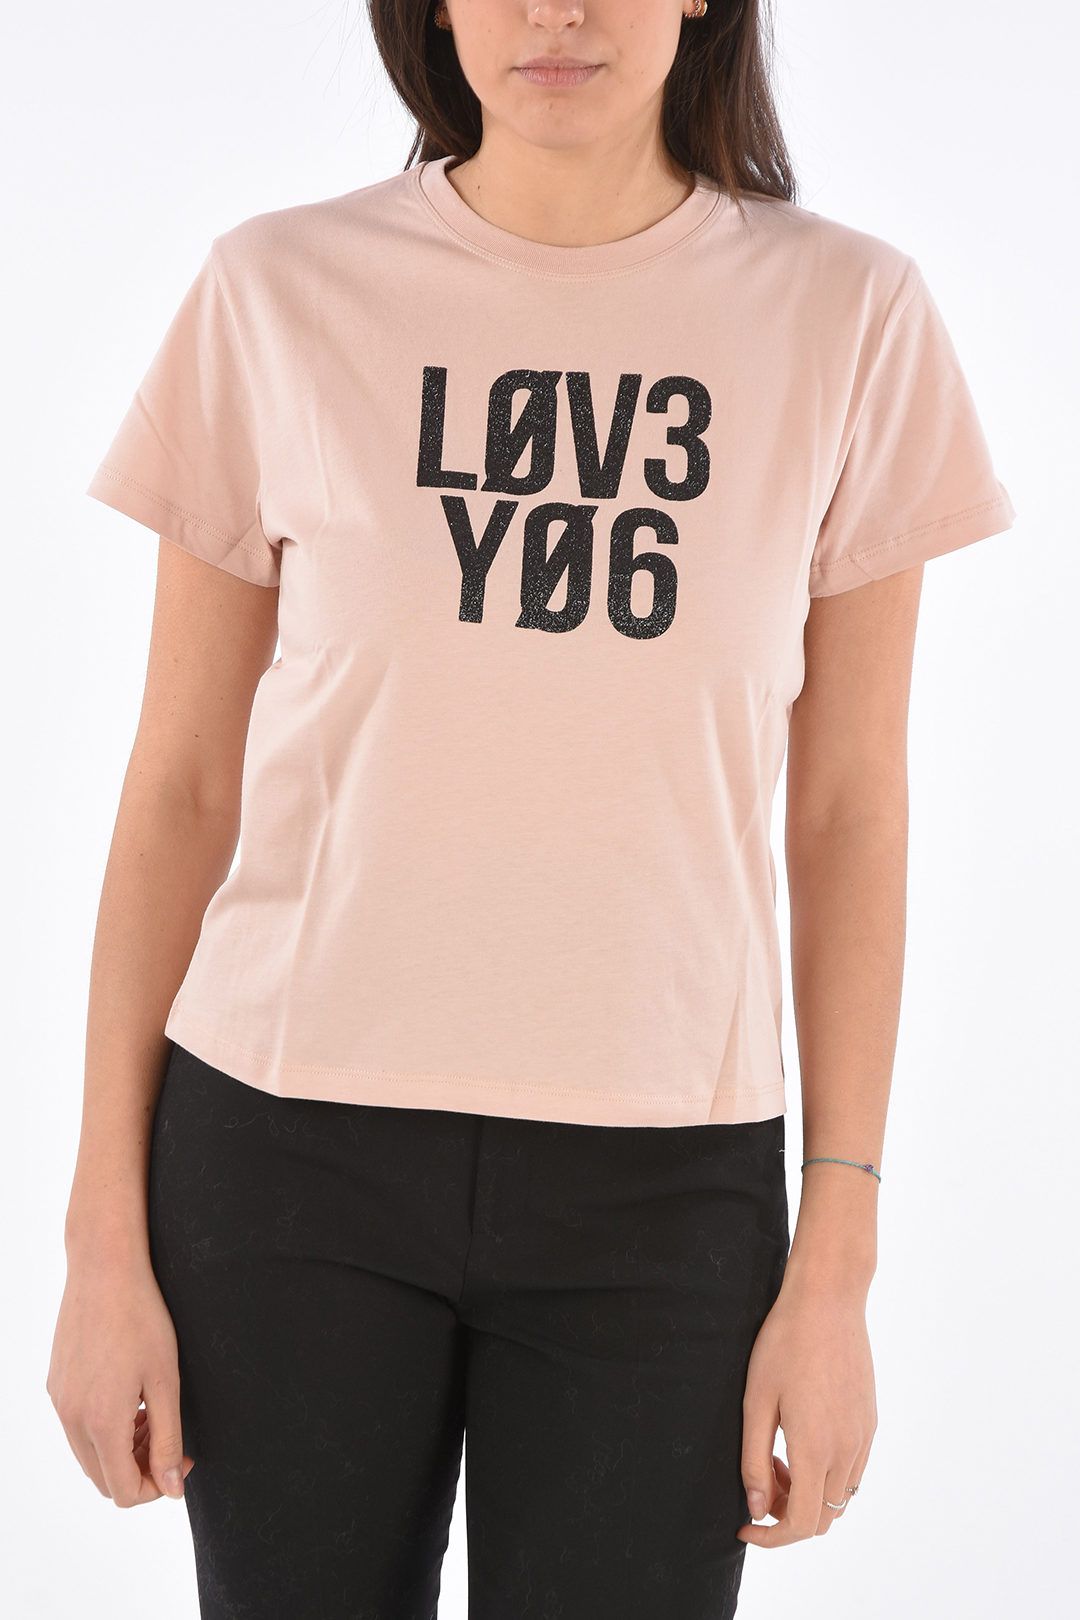 Red Valentino T-shirt I LOVE YOU con Stampa Glitterata donna - Glamood  Outlet